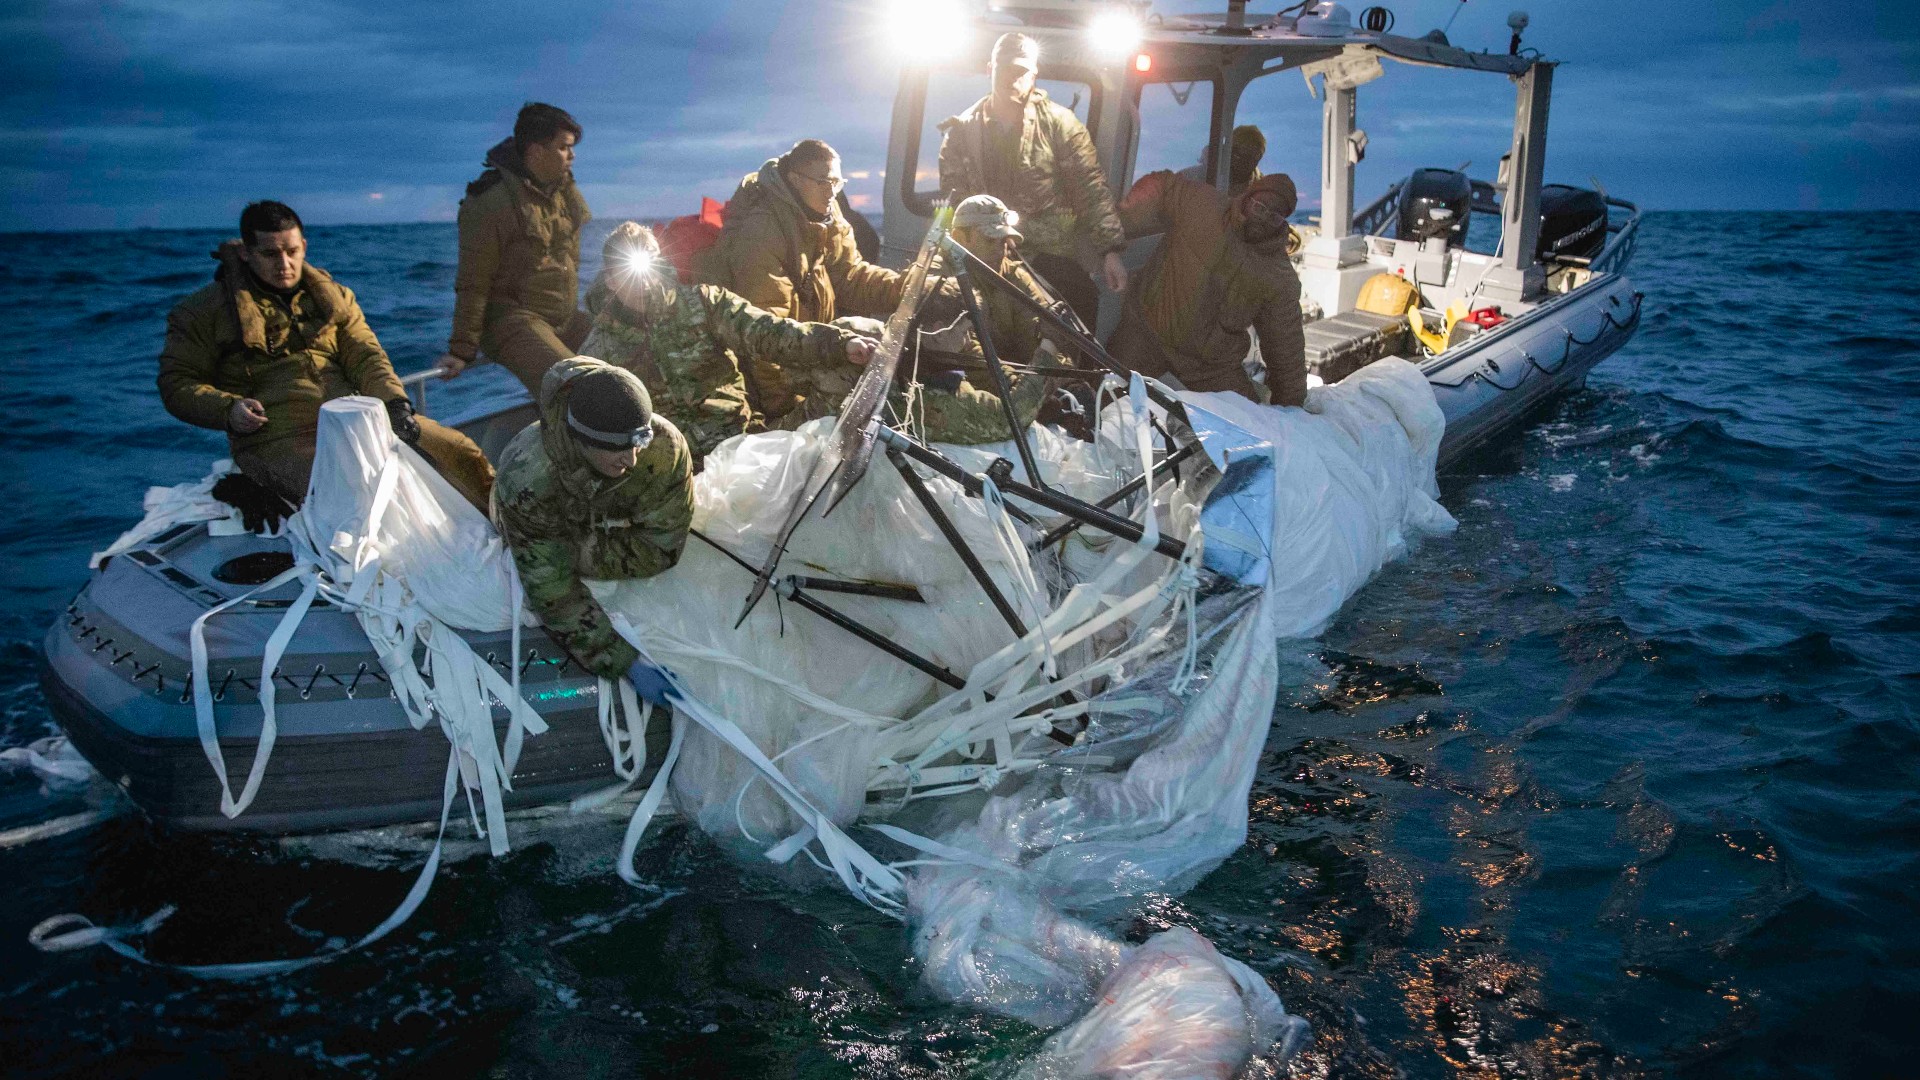 Sailors assigned to Explosive Ordnance Disposal Group 2 recover a high-altitude surveillance balloon off the coast of Myrtle Beach, South Carolina, on February 5, 2023.